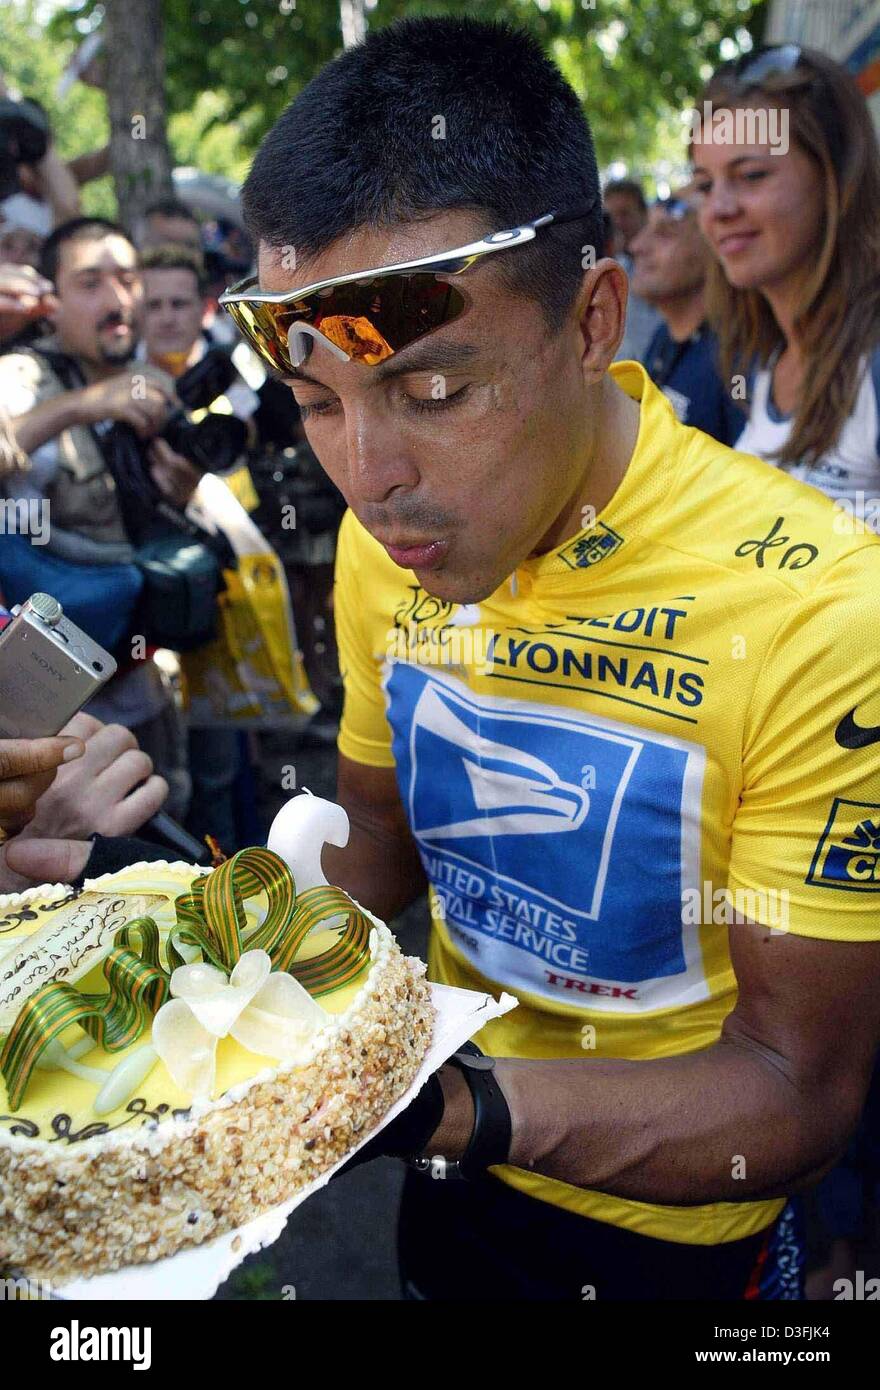 (dpa) - Colombian cyclist Victor Hugo Pena (R) (Team US Postal Service) wears the yellow tricot of the front-runner while he blows out the candles on his birthday cake before the start of the fifth leg of the Tour de France in Troyes, France, 10 July 2003. Pena celebrates his 29th birthday today. The fifth leg covers a distance of 196,5 kilometres from the French town of Troyes to  Stock Photo